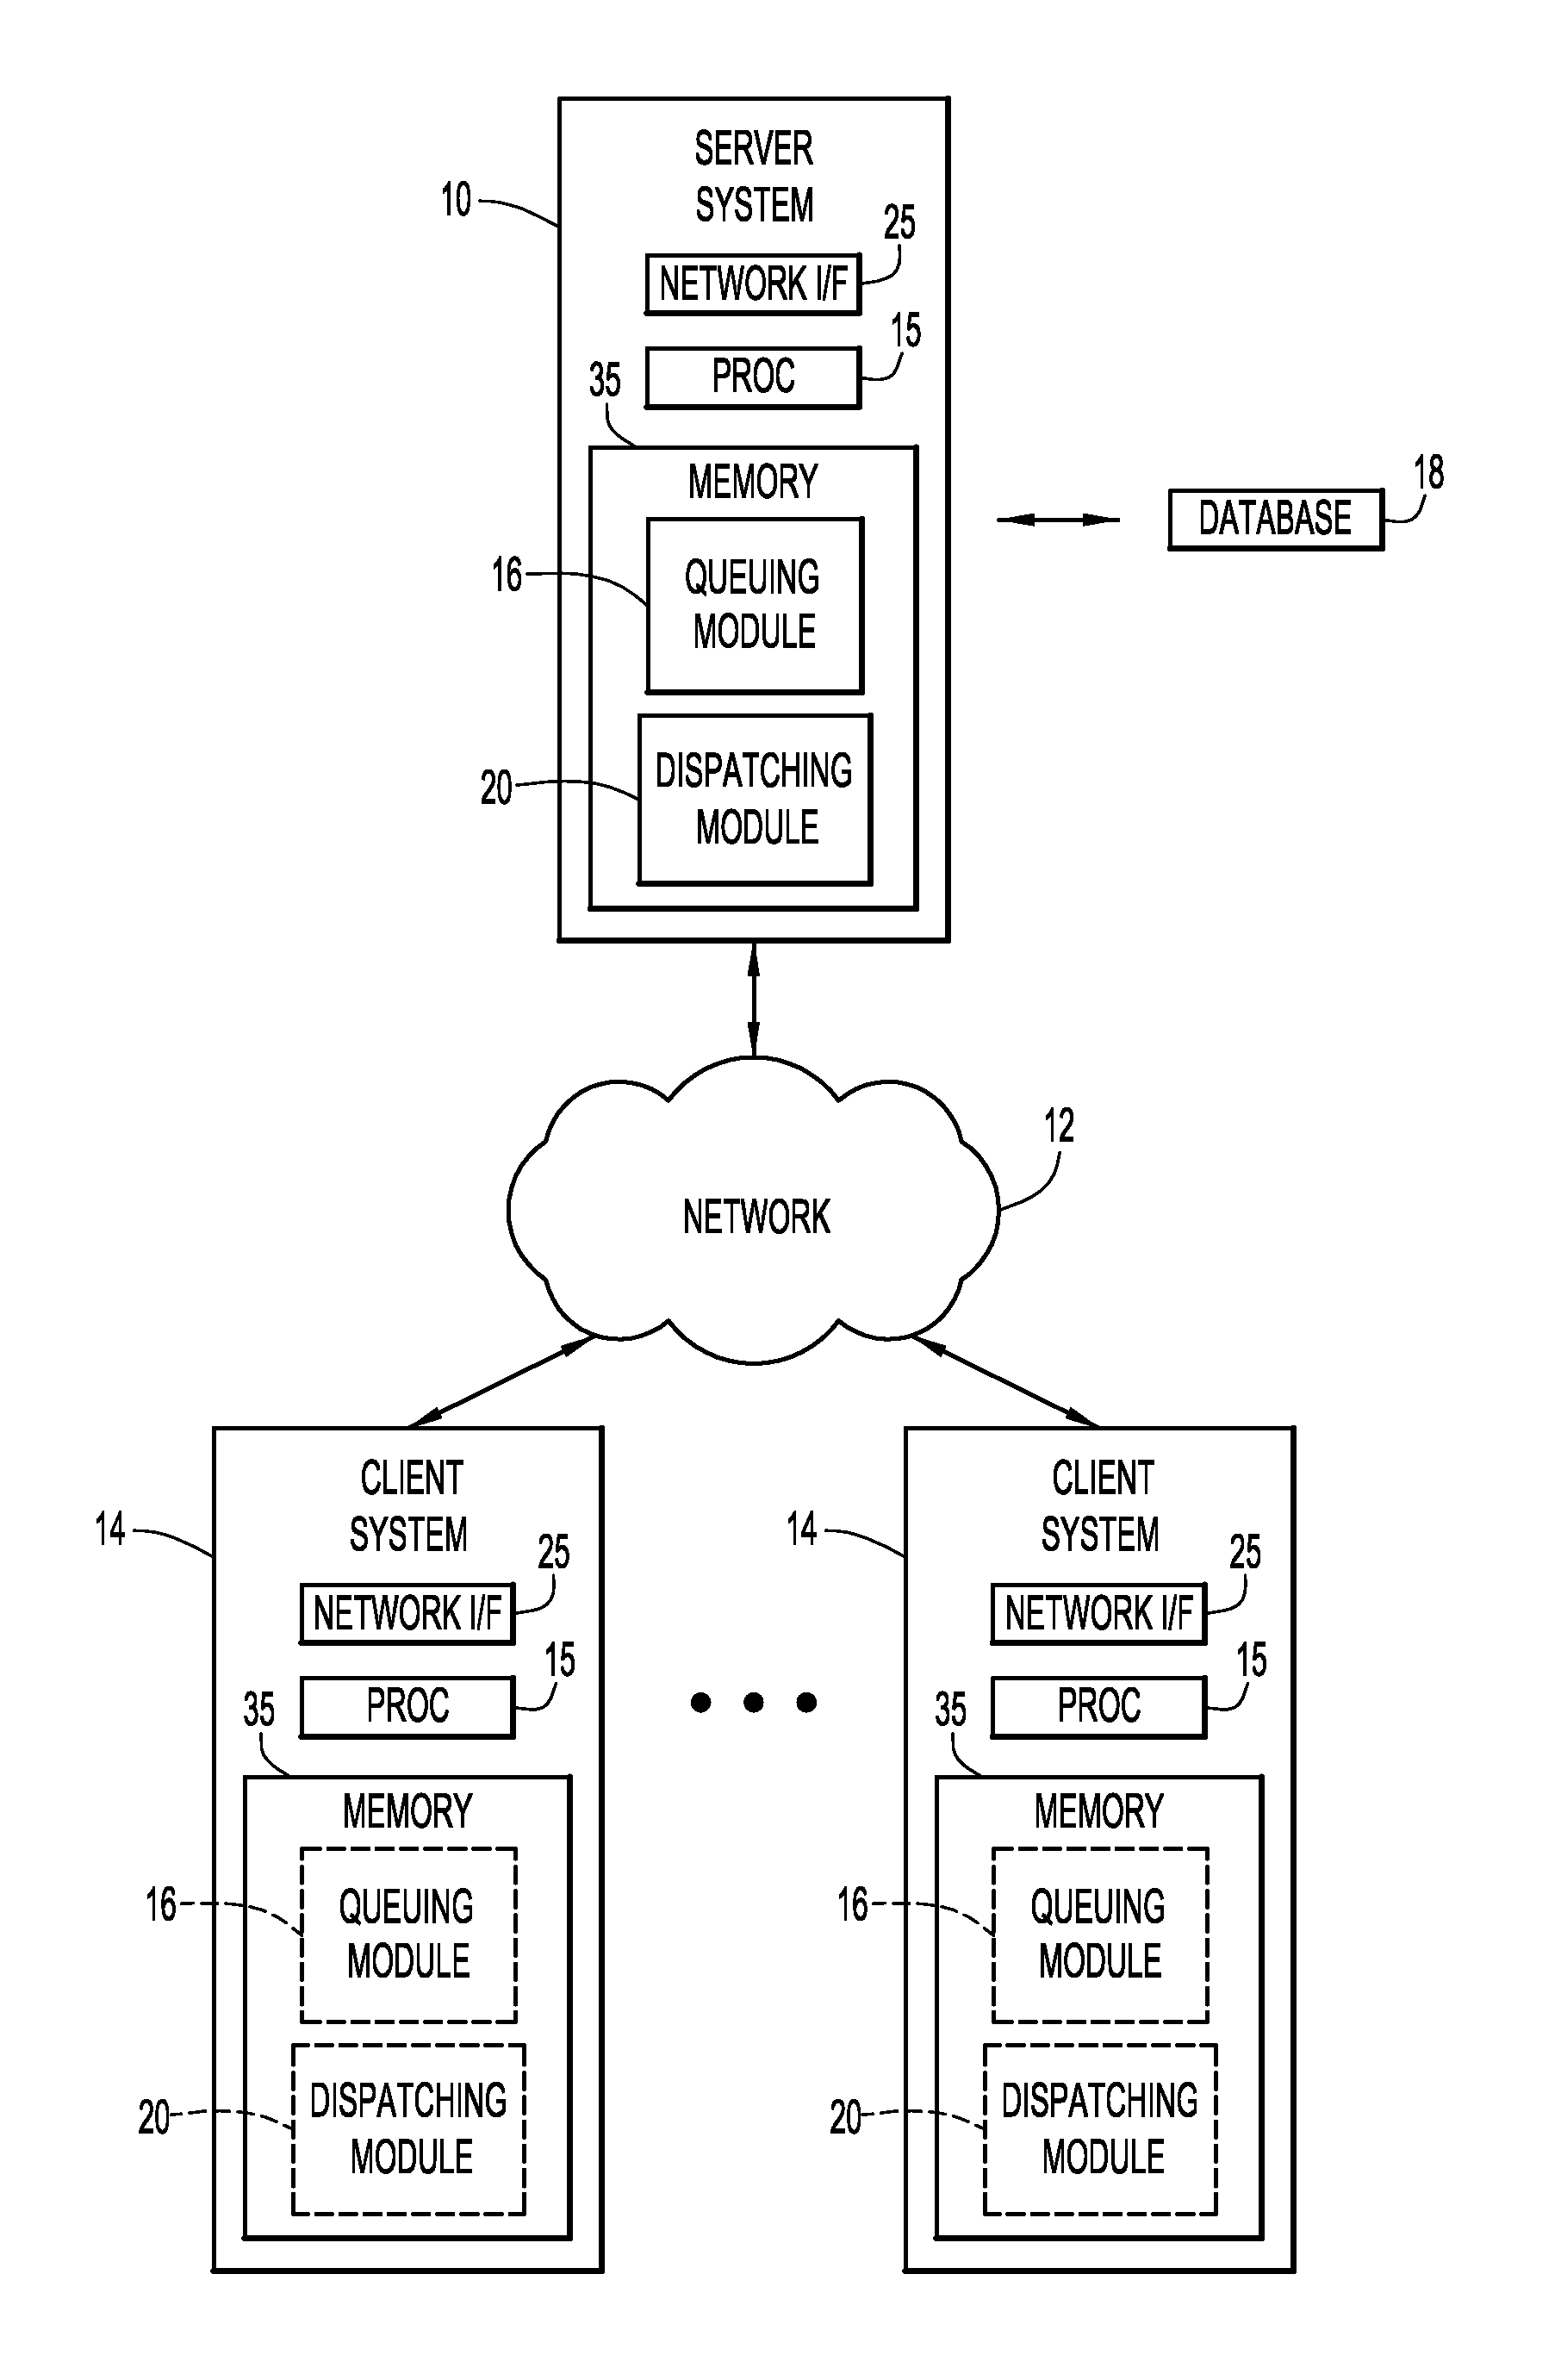 Processor provisioning by a middleware system for a plurality of logical processor partitions